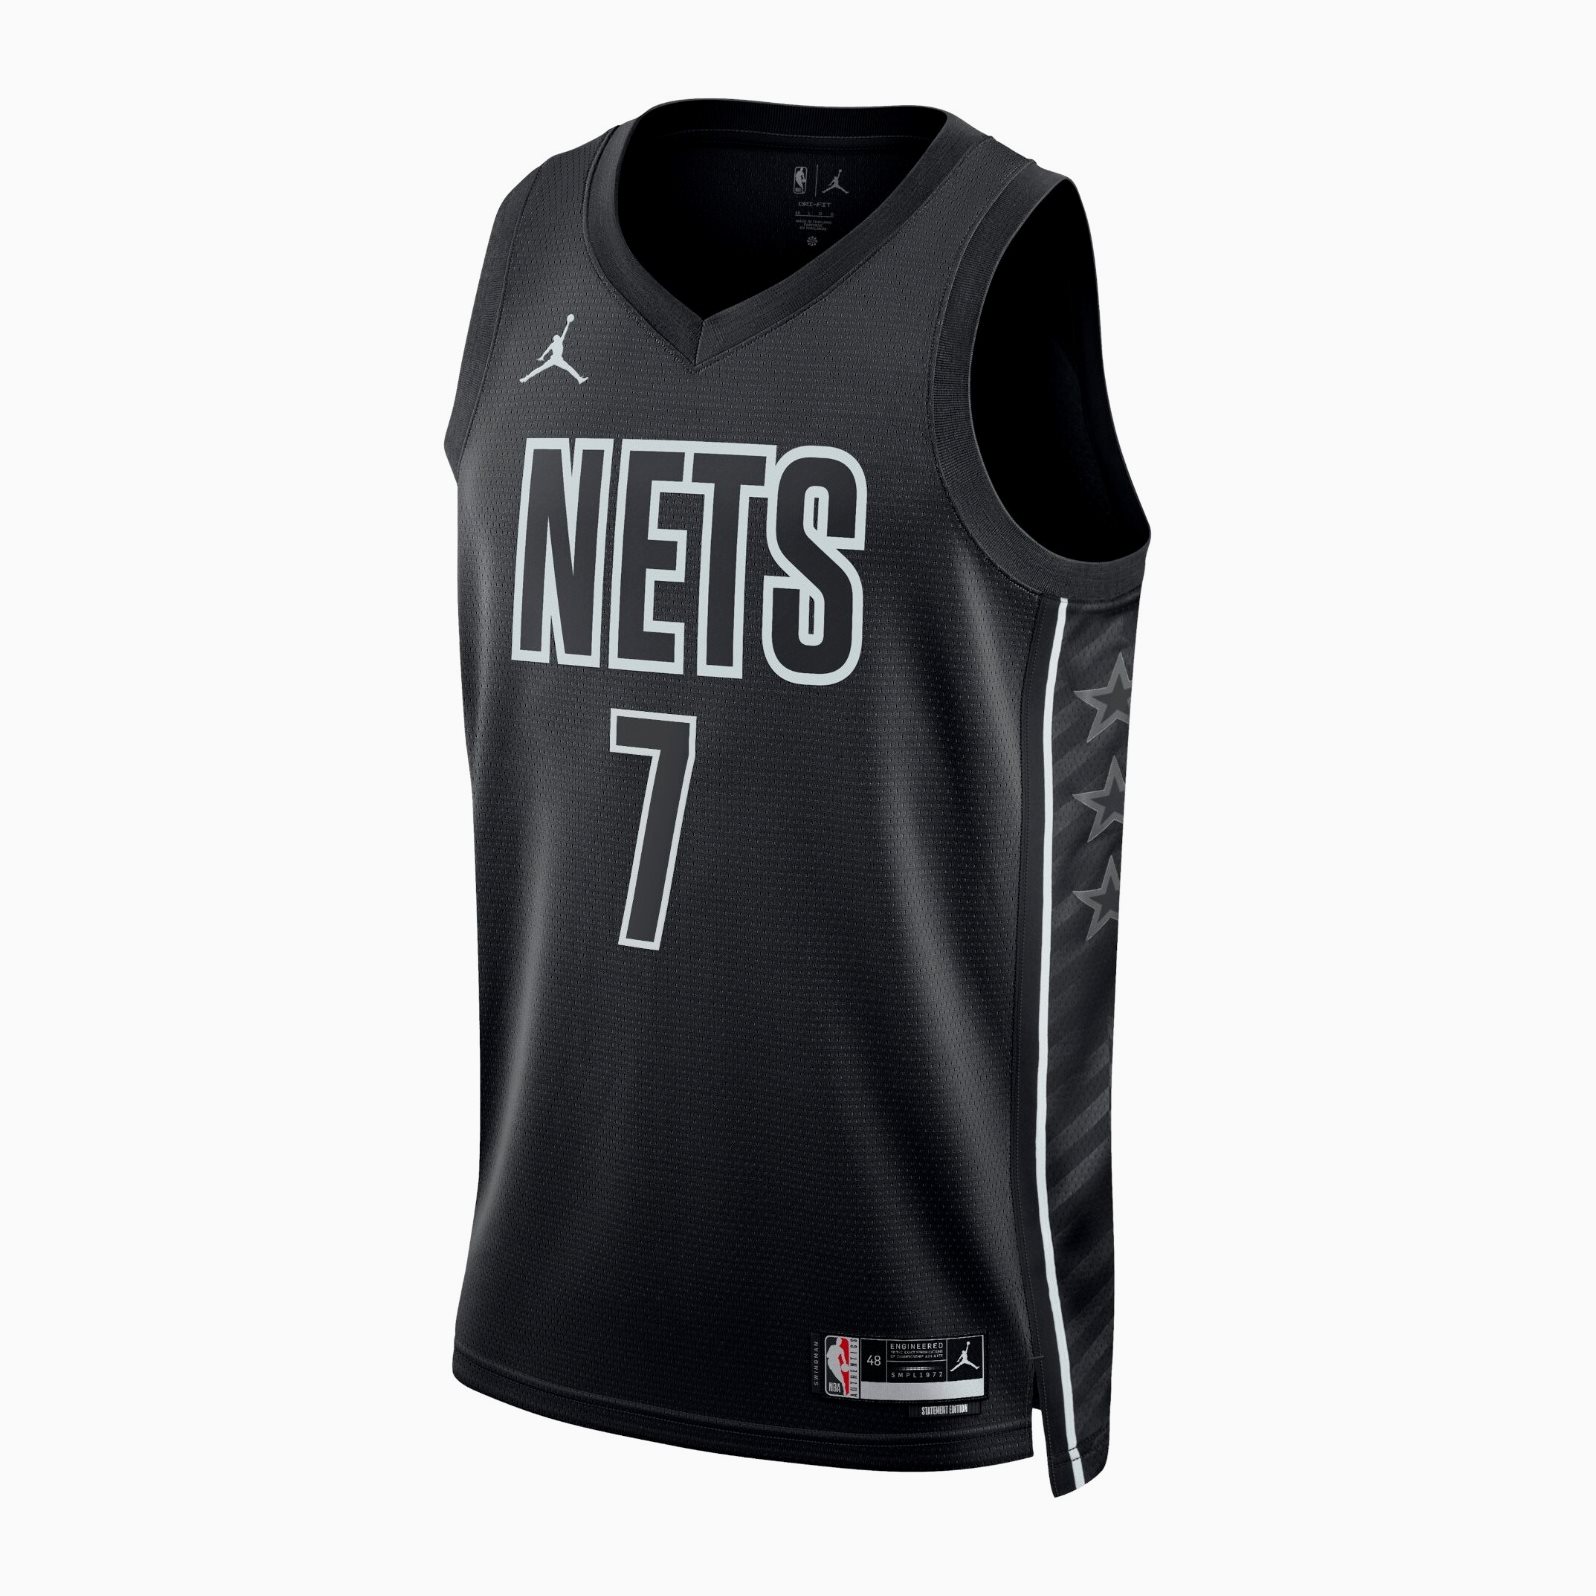 Brooklyn Nets Unveil New Statement Edition Uniform for 2022-23